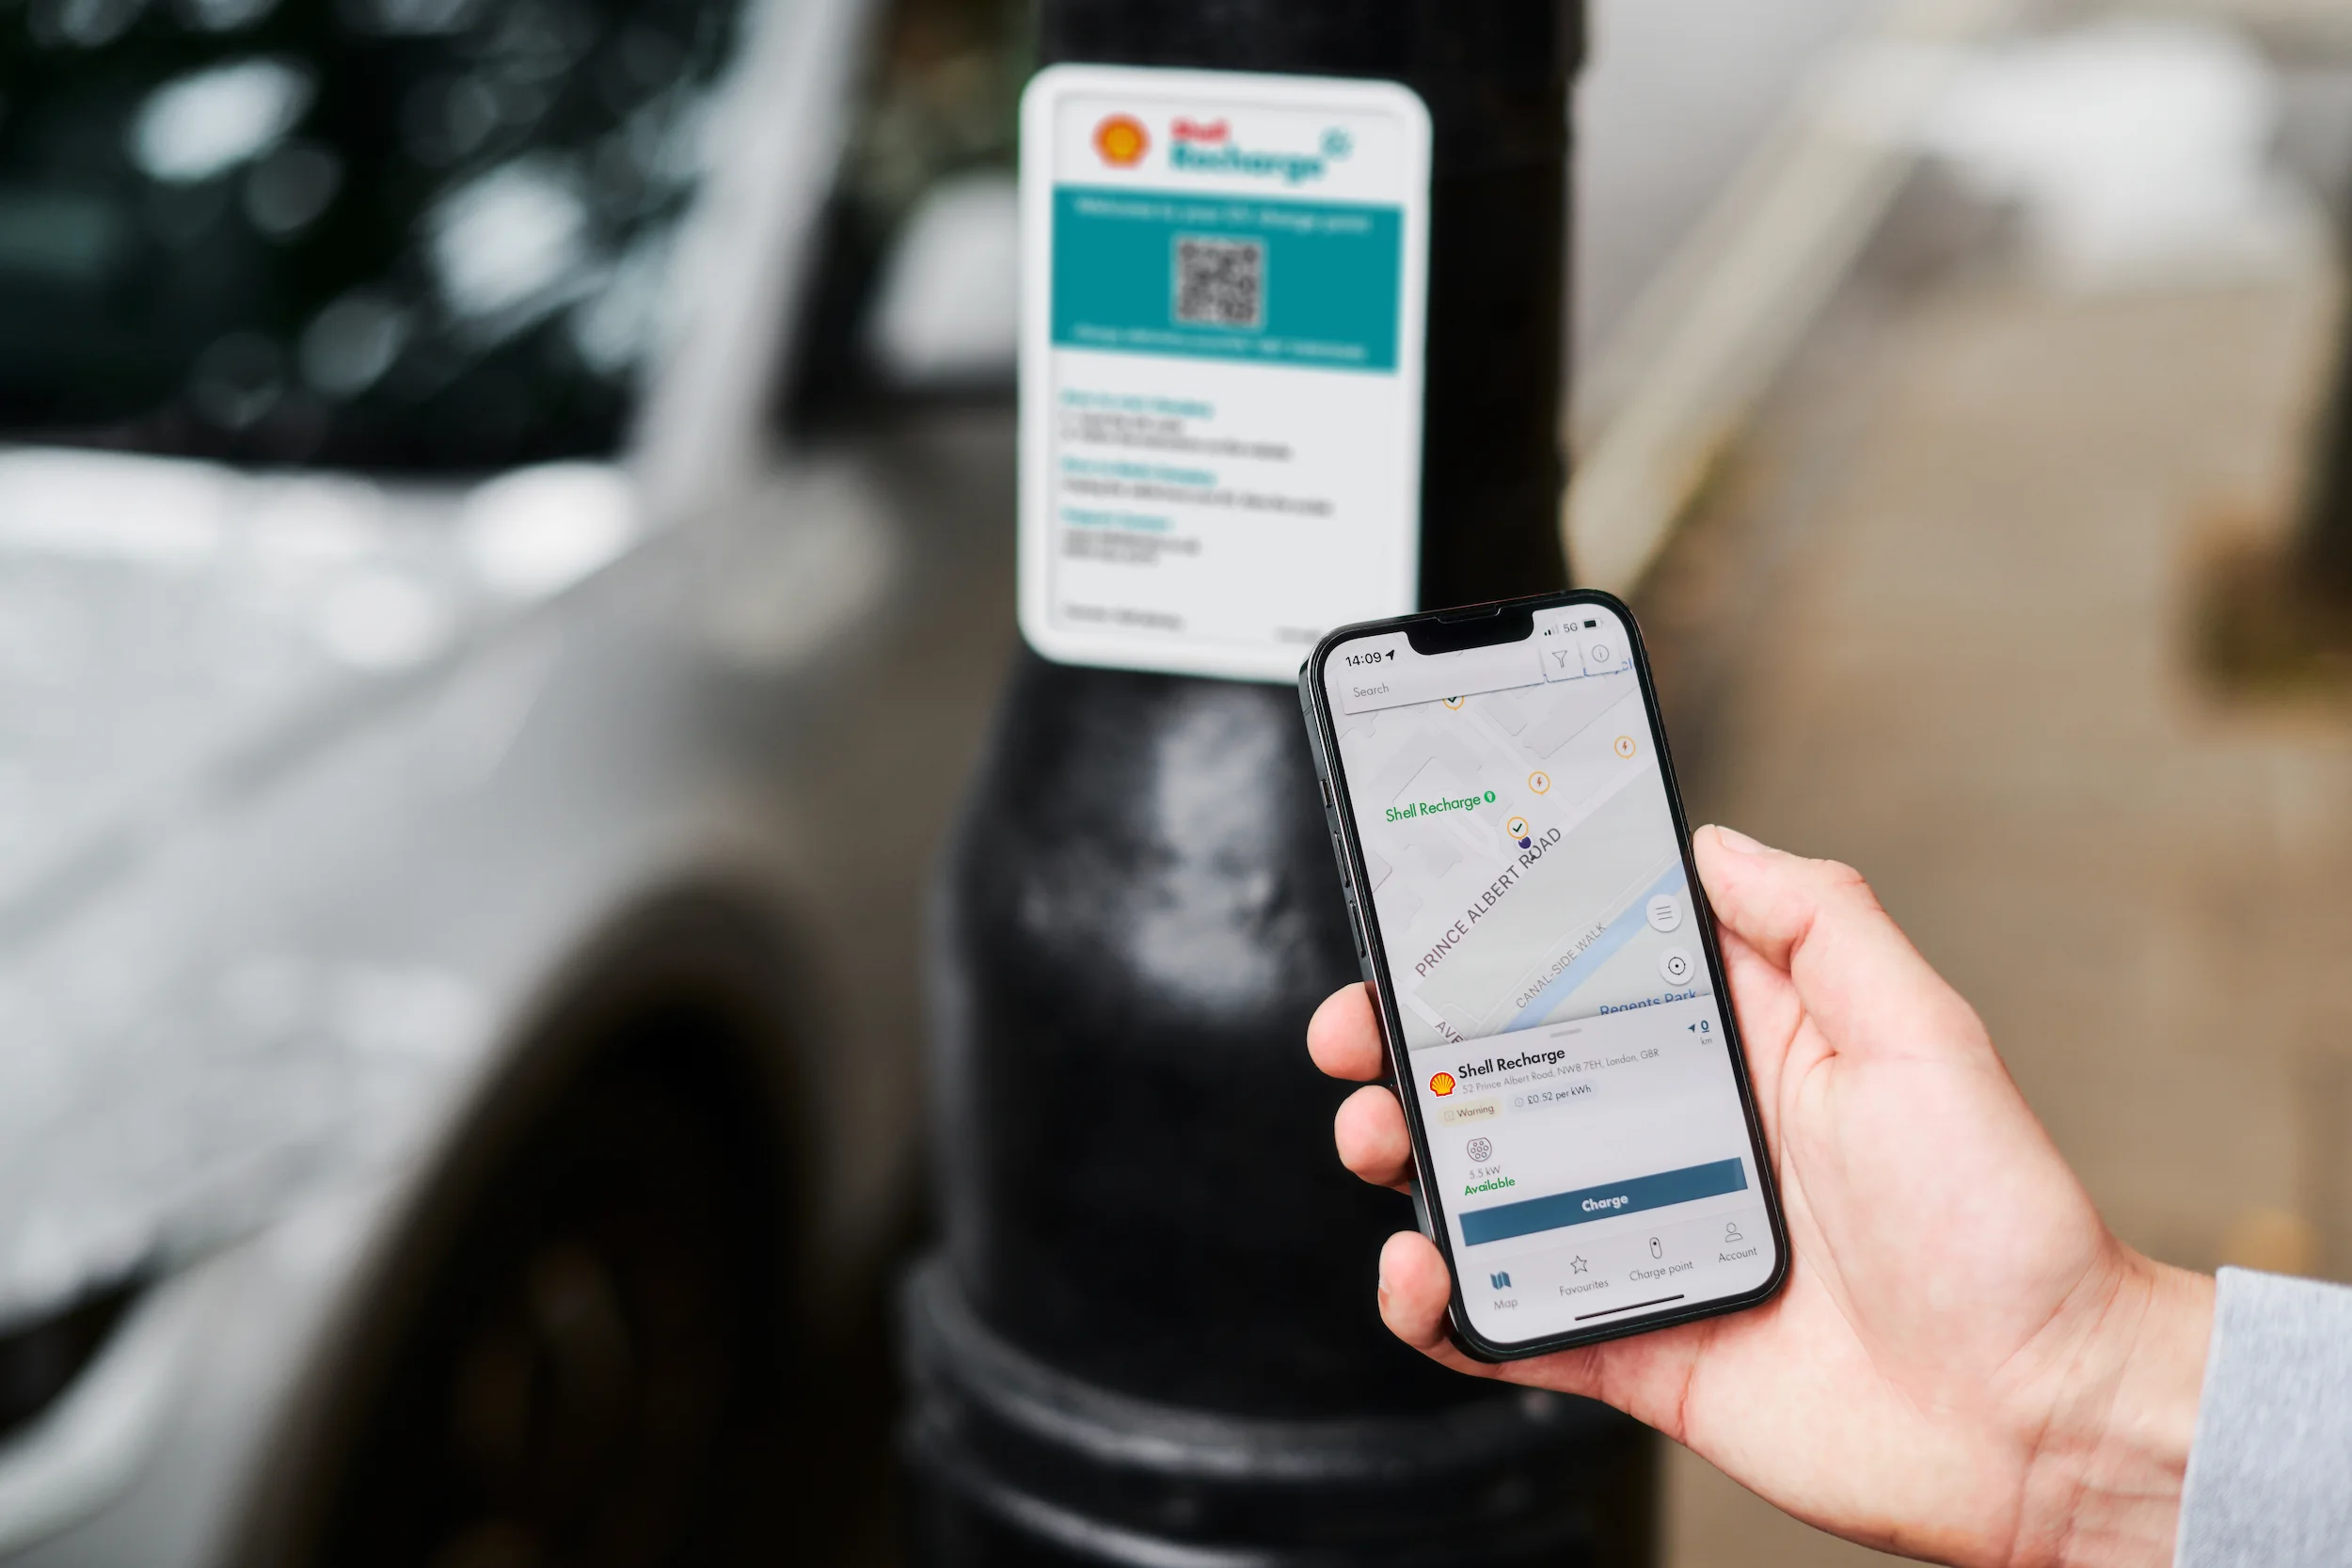 A driver is choosing an ubitricity-operated lamppost charge point in his Shell Recharge App to conveniently start charging his electric vehicle.